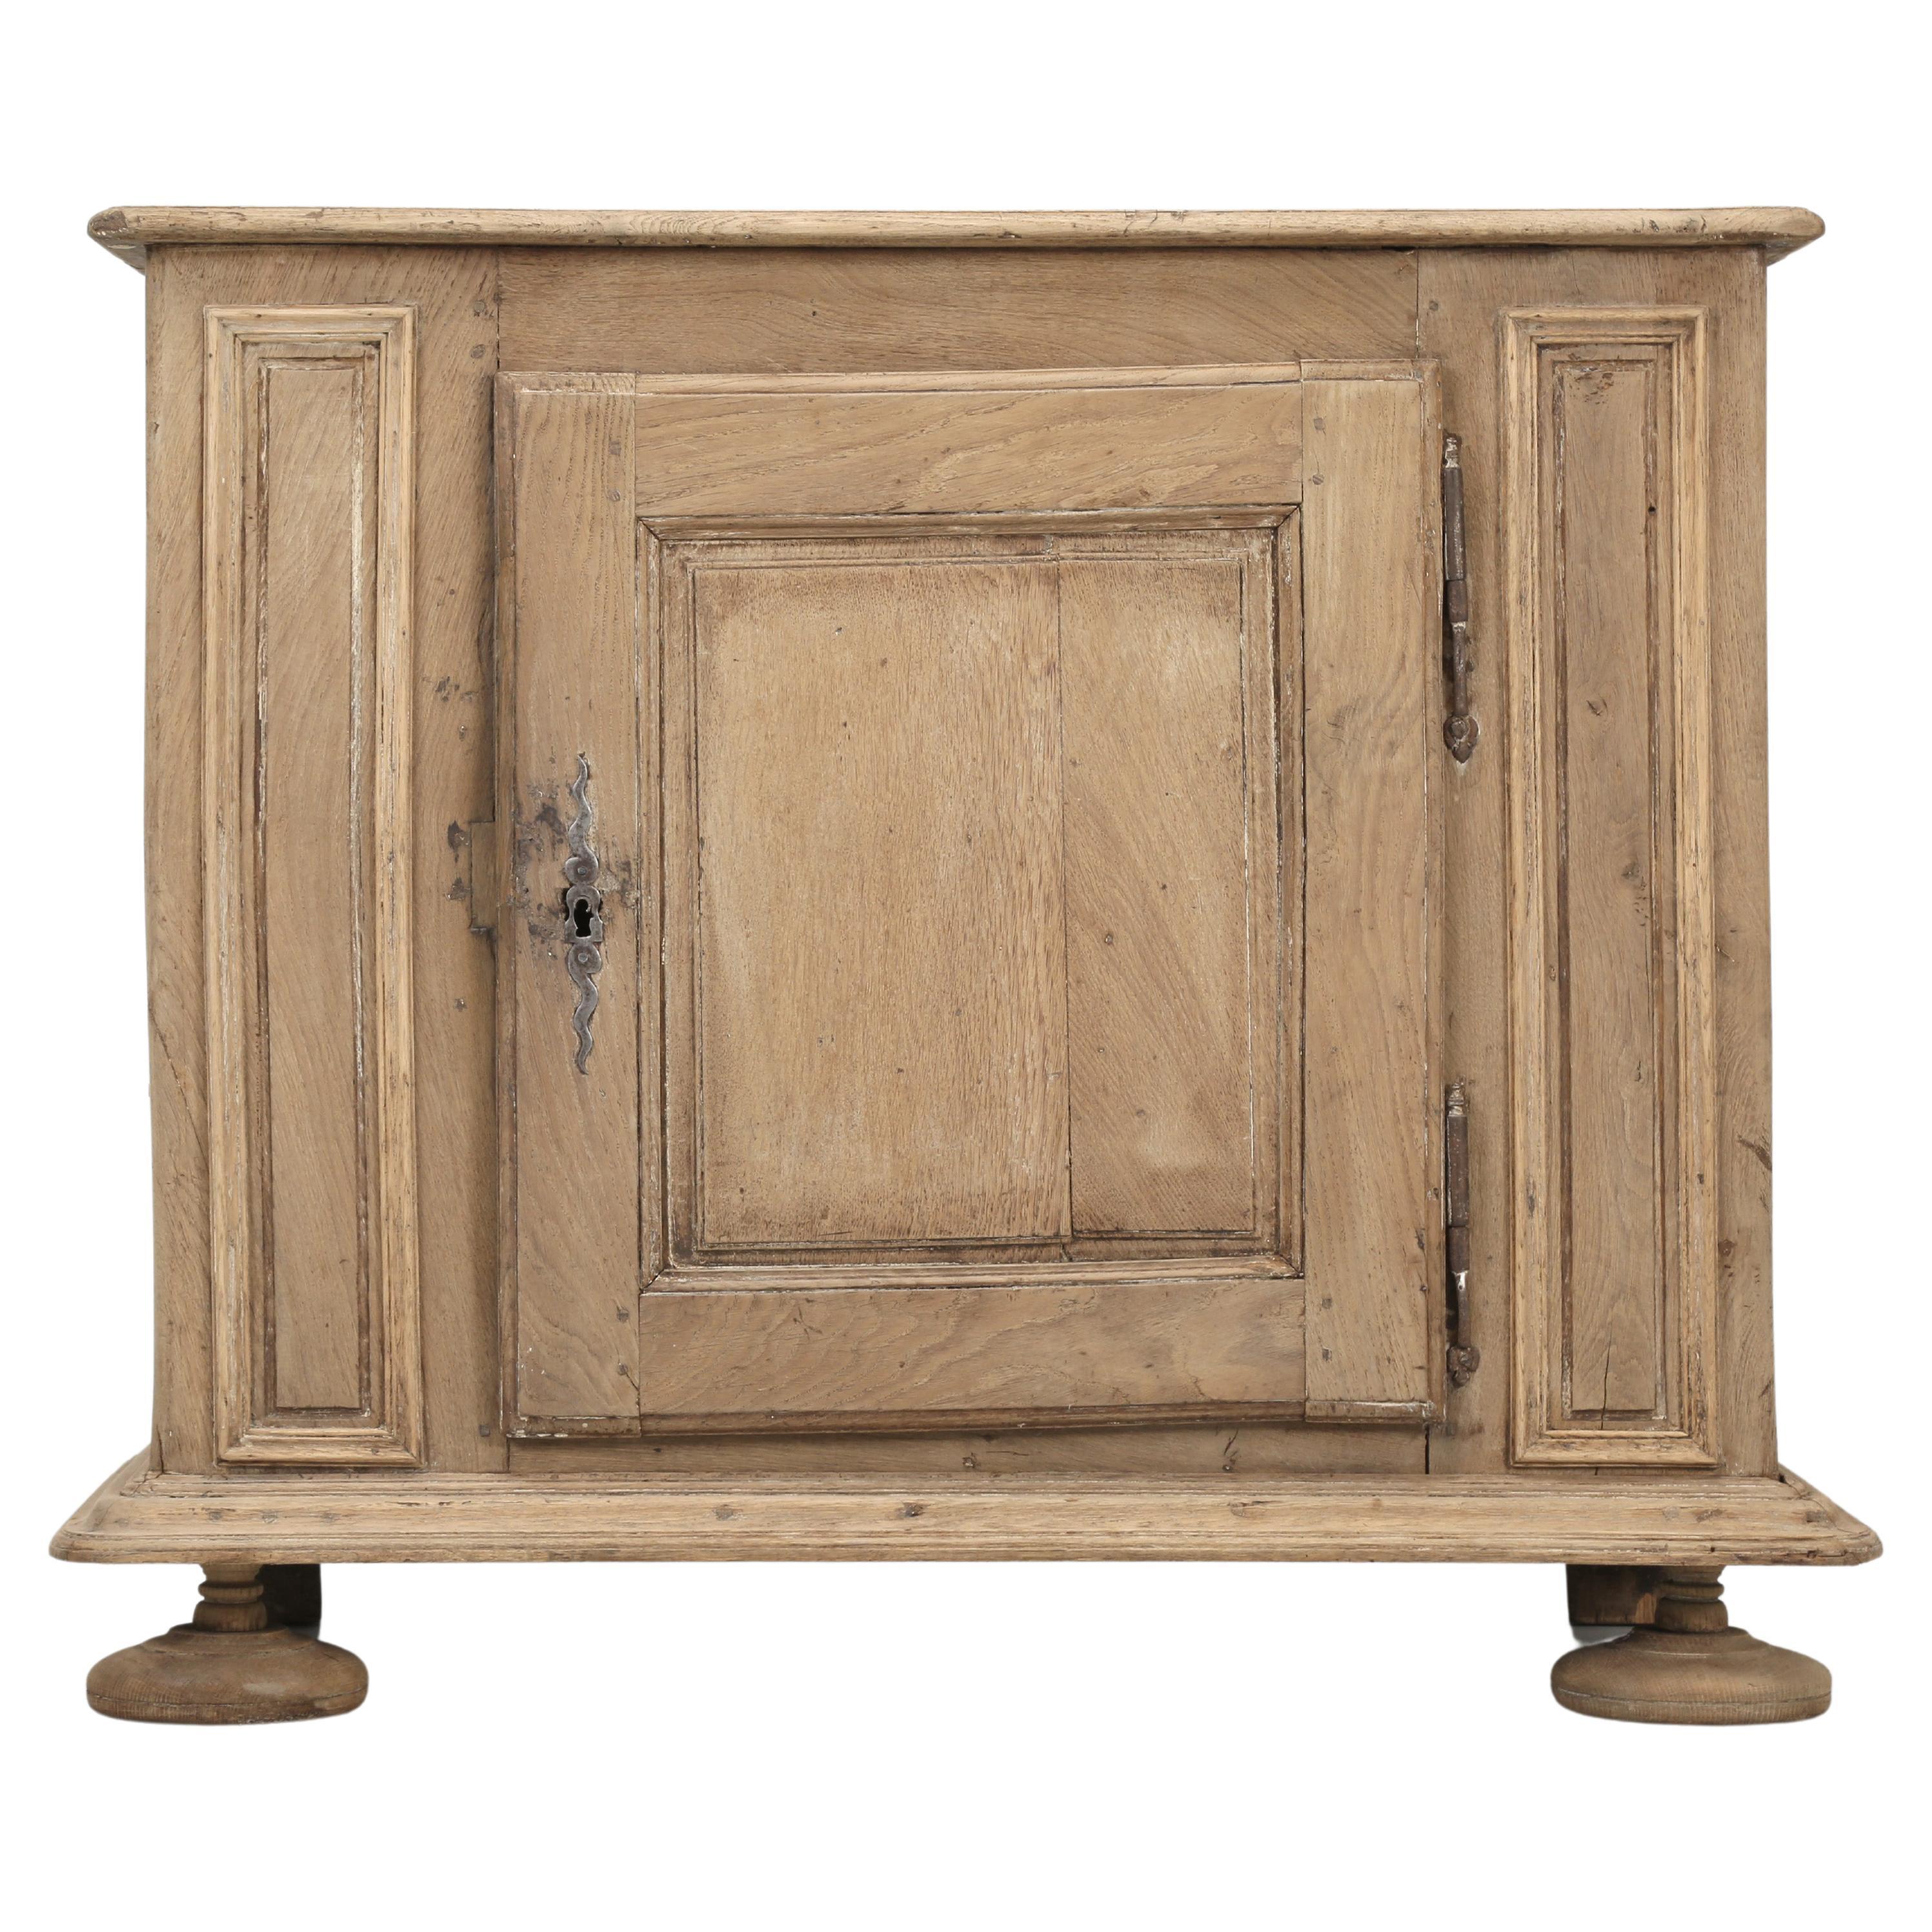 French Louis XIII Style Cupboard, Confiturier in Natural Washed Oak circa 1700's